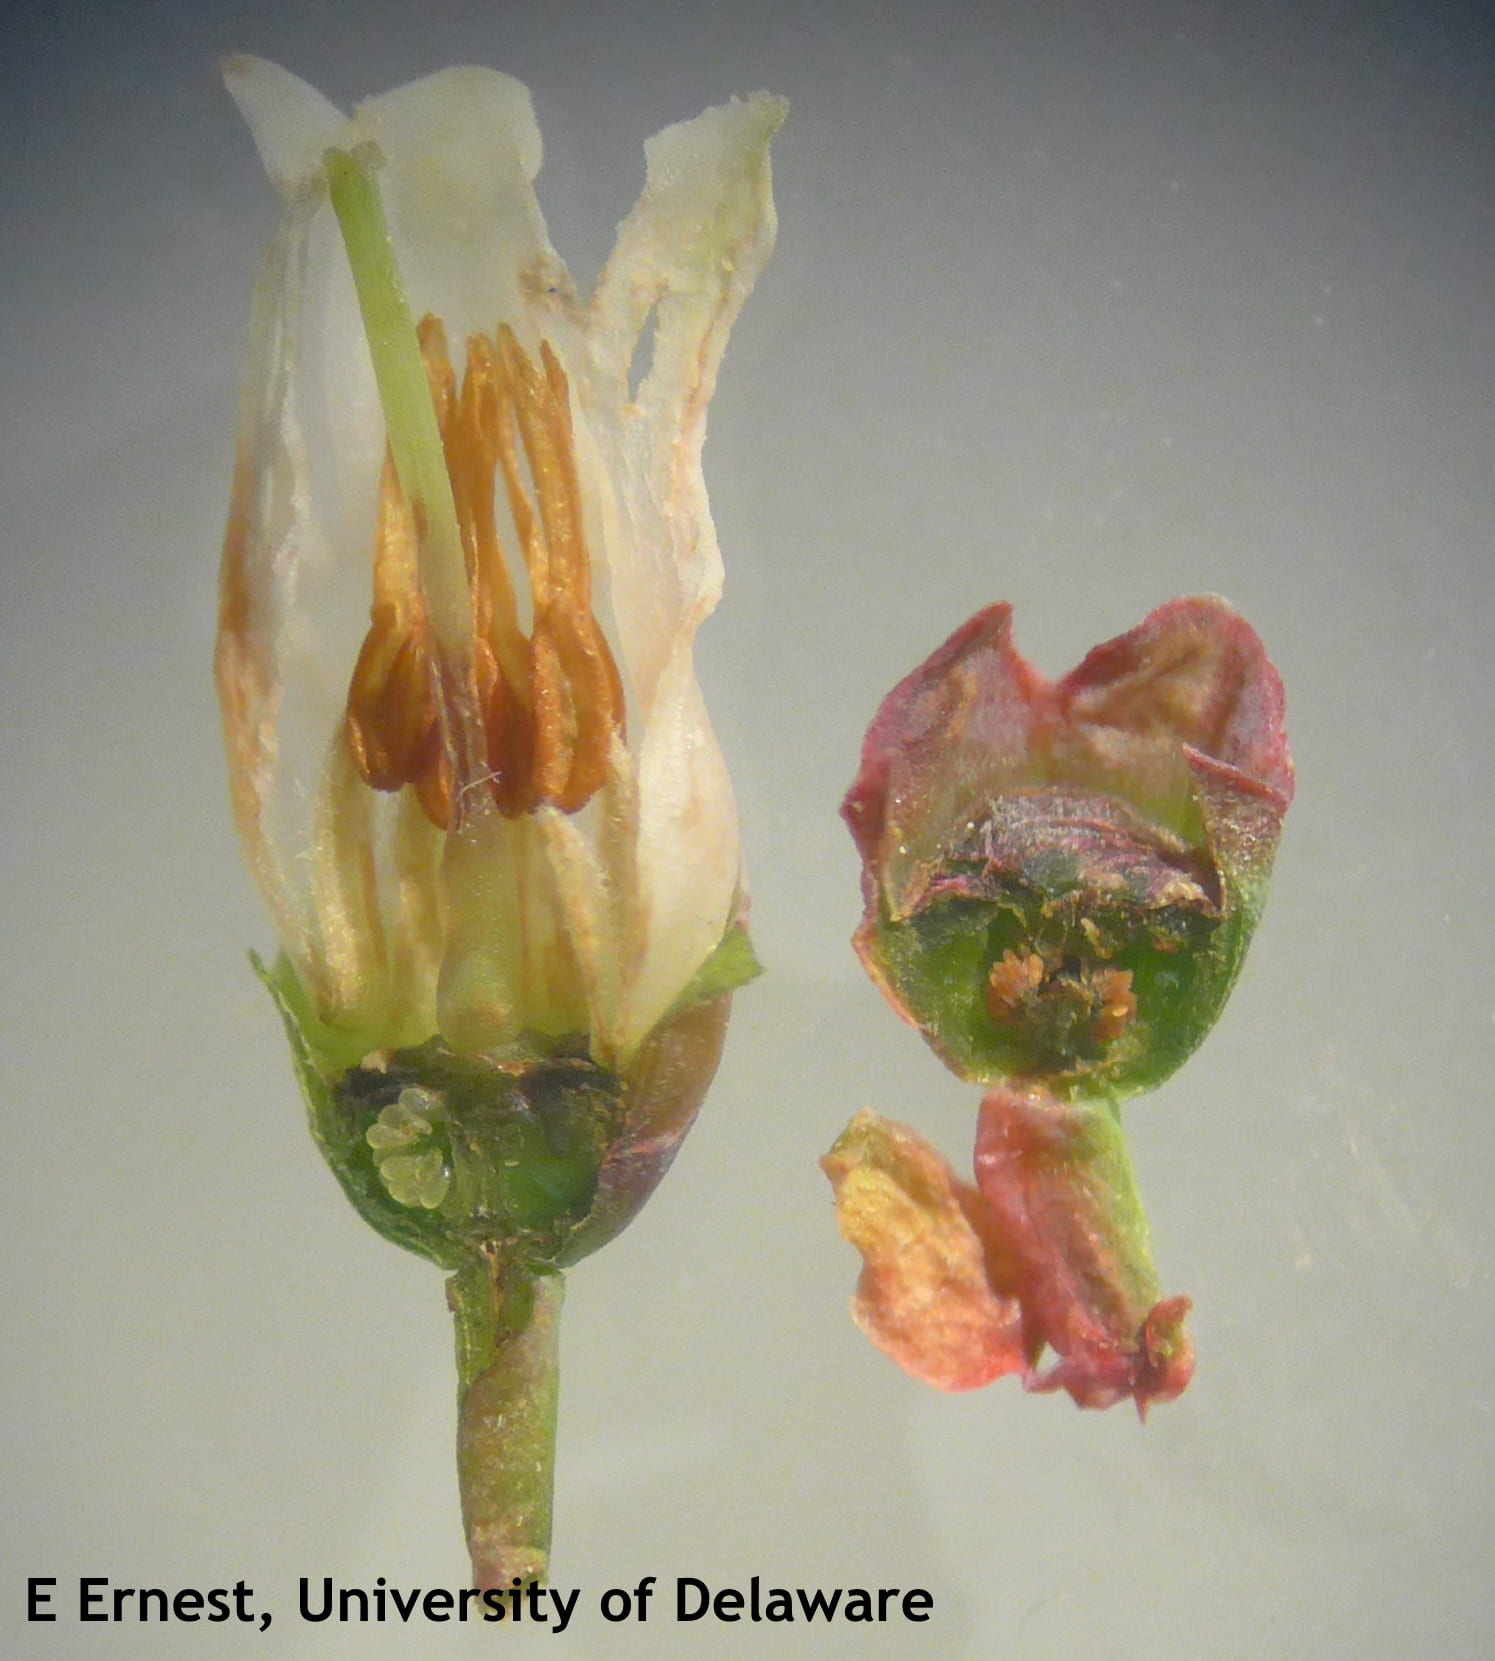 The blueberry fruit on the right was damaged by freezing temperatures and will not mature. Seeds inside the ovary have turned brown. The flower on the left was not frozen, seeds remain plump and green.